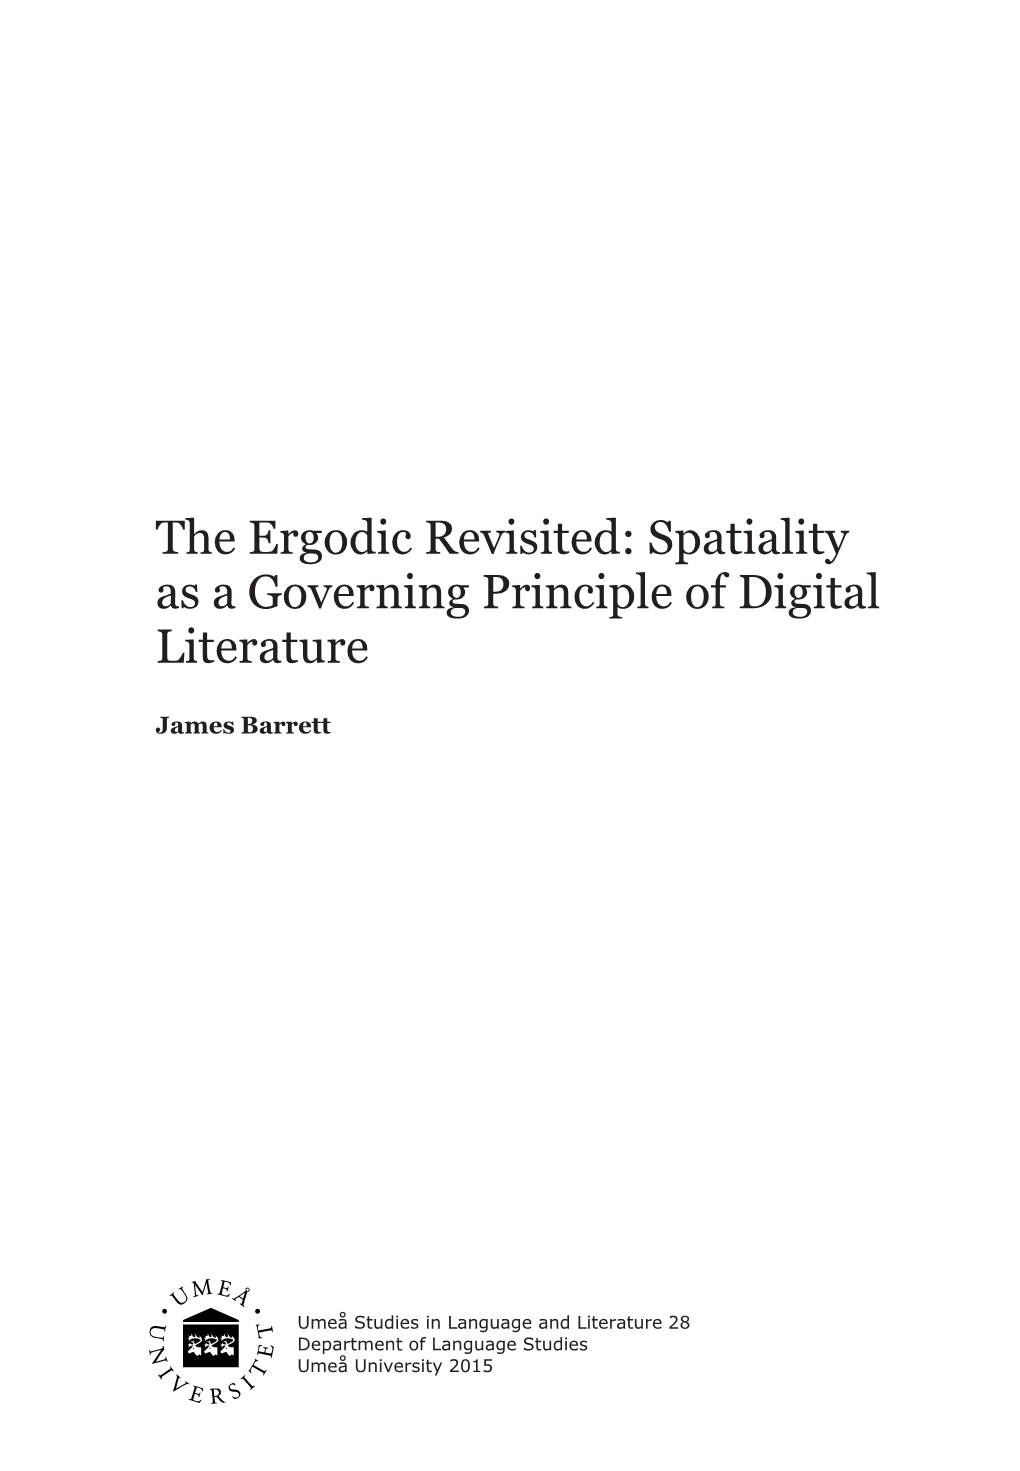 Spatiality As a Governing Principle of Digital Literature